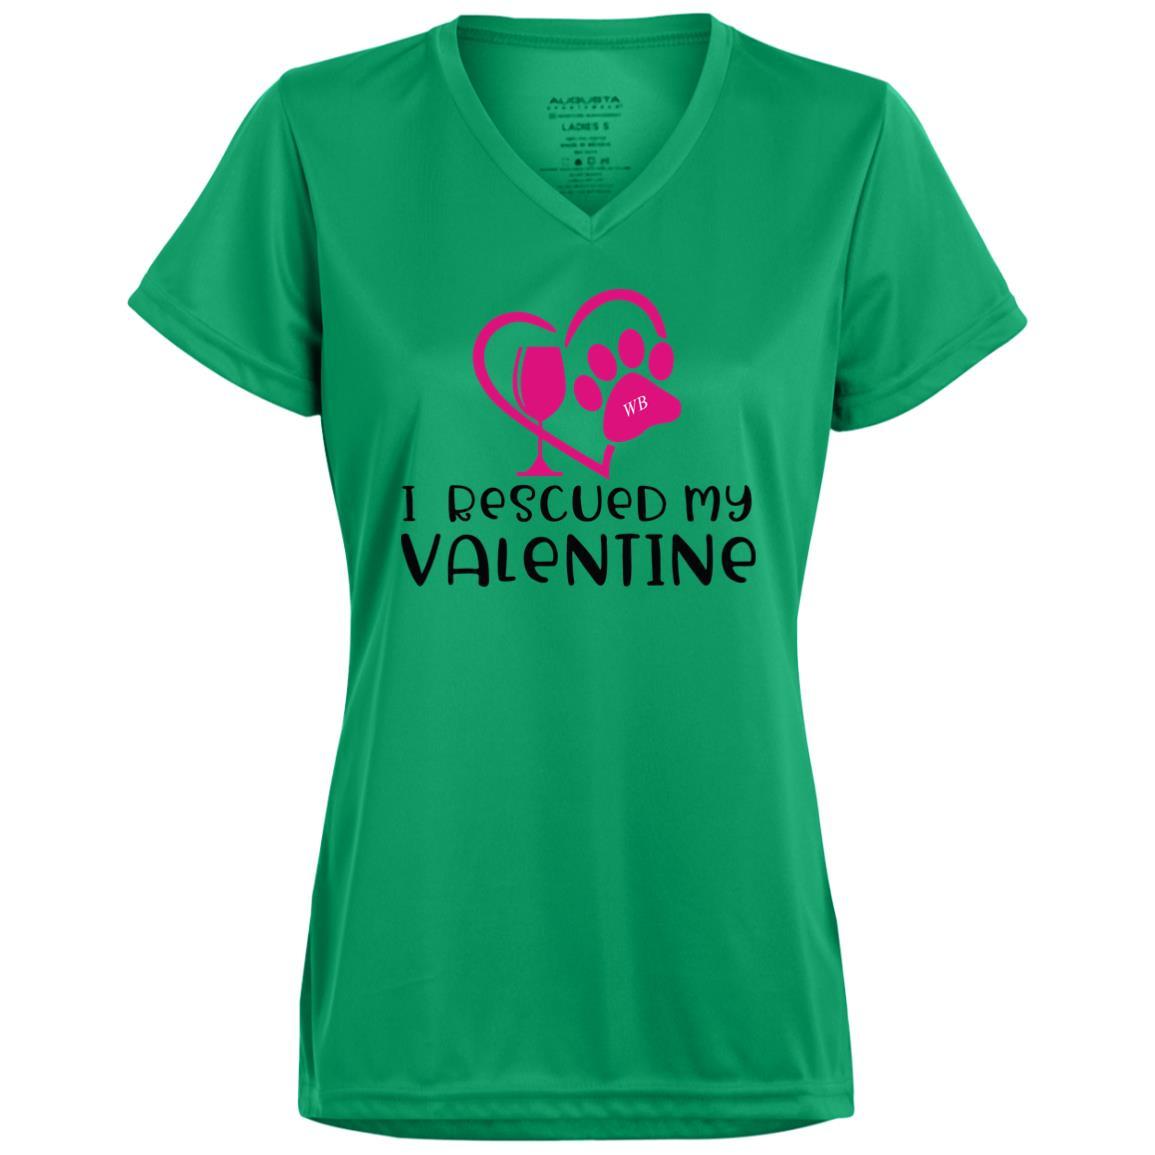 T-Shirts Kelly / X-Small Winey Bitches Co "I Rescued My Valentine" Ladies' Wicking T-Shirt WineyBitchesCo